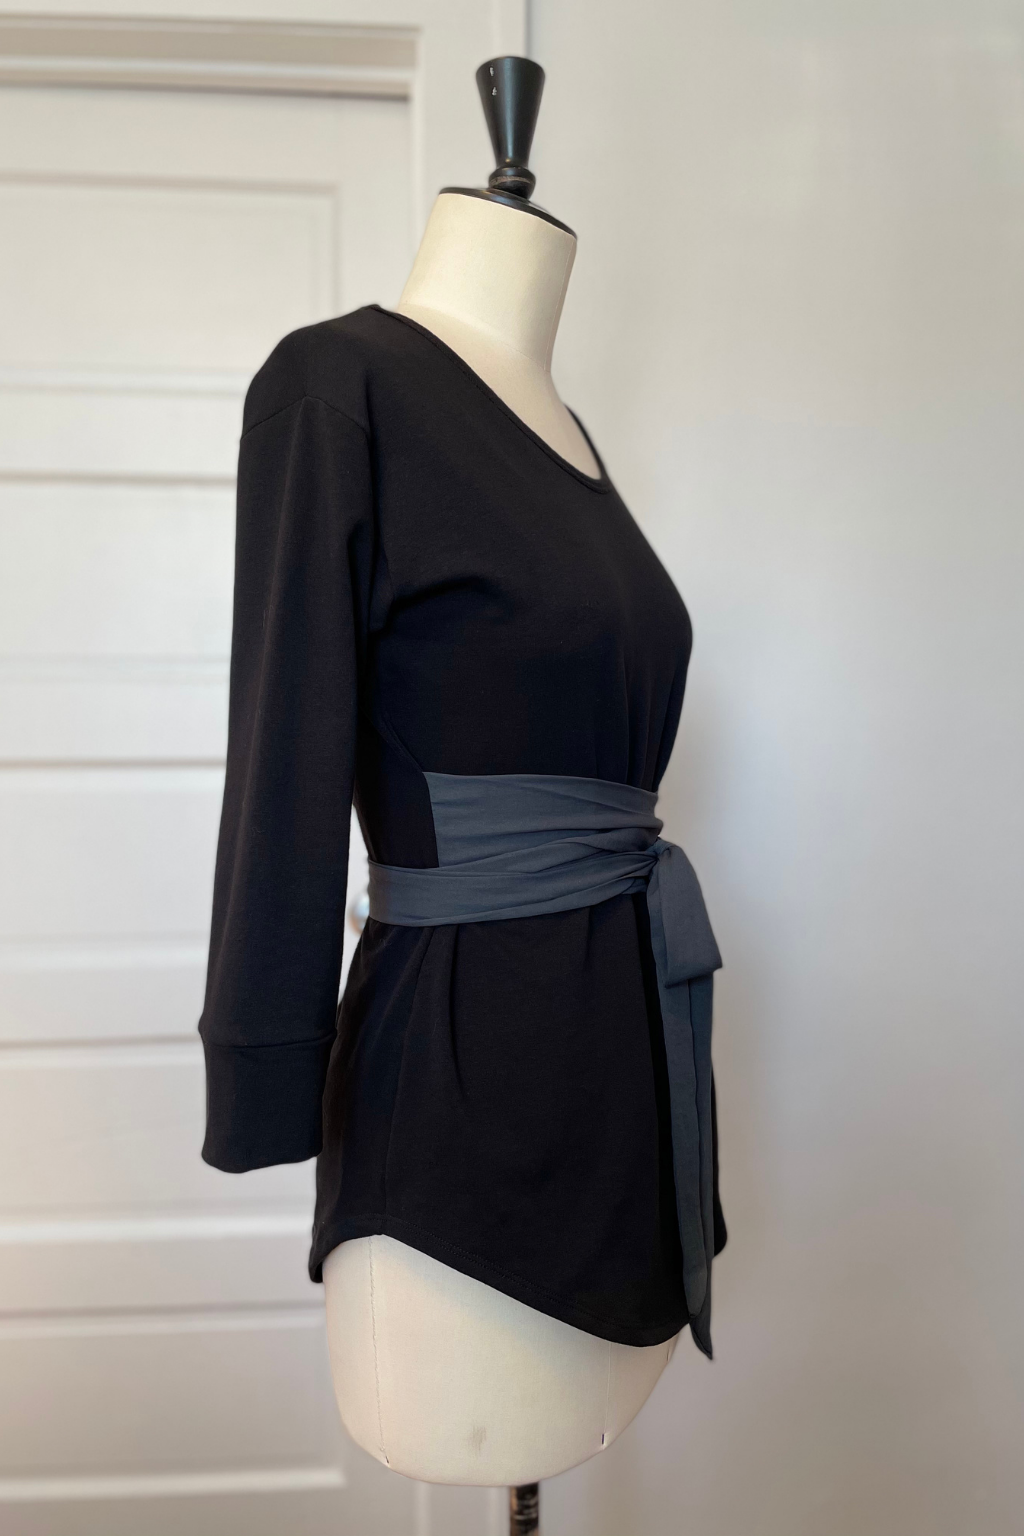 KOKOON Sweet Sweat French Terry and Chiffon Wrap Top in Black and Charcoal Side